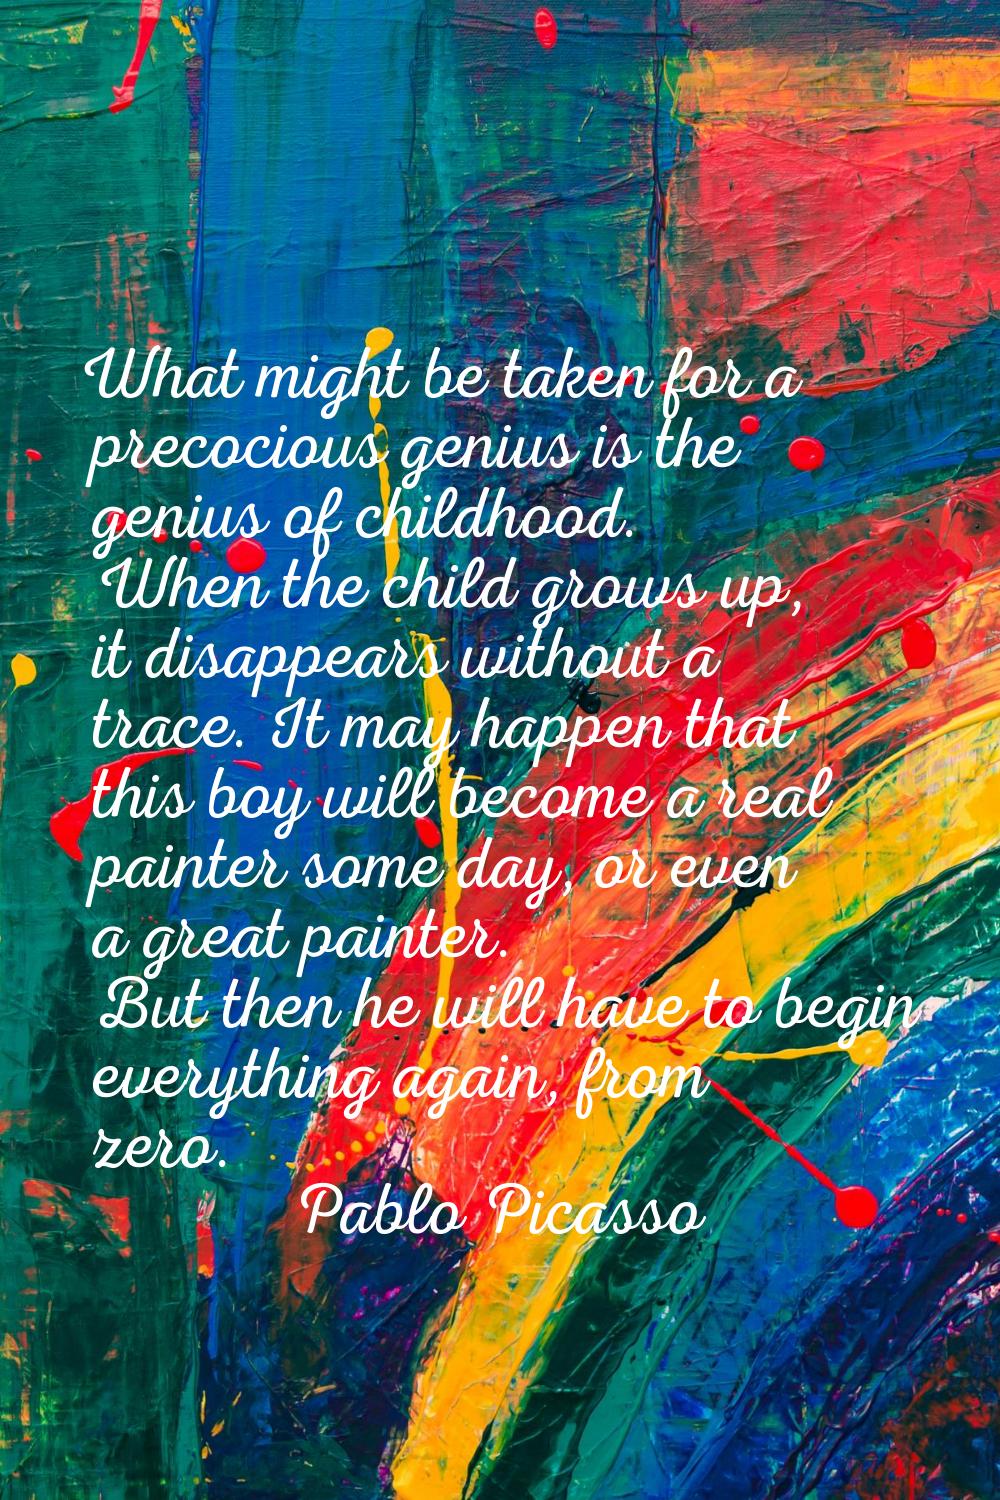 What might be taken for a precocious genius is the genius of childhood. When the child grows up, it